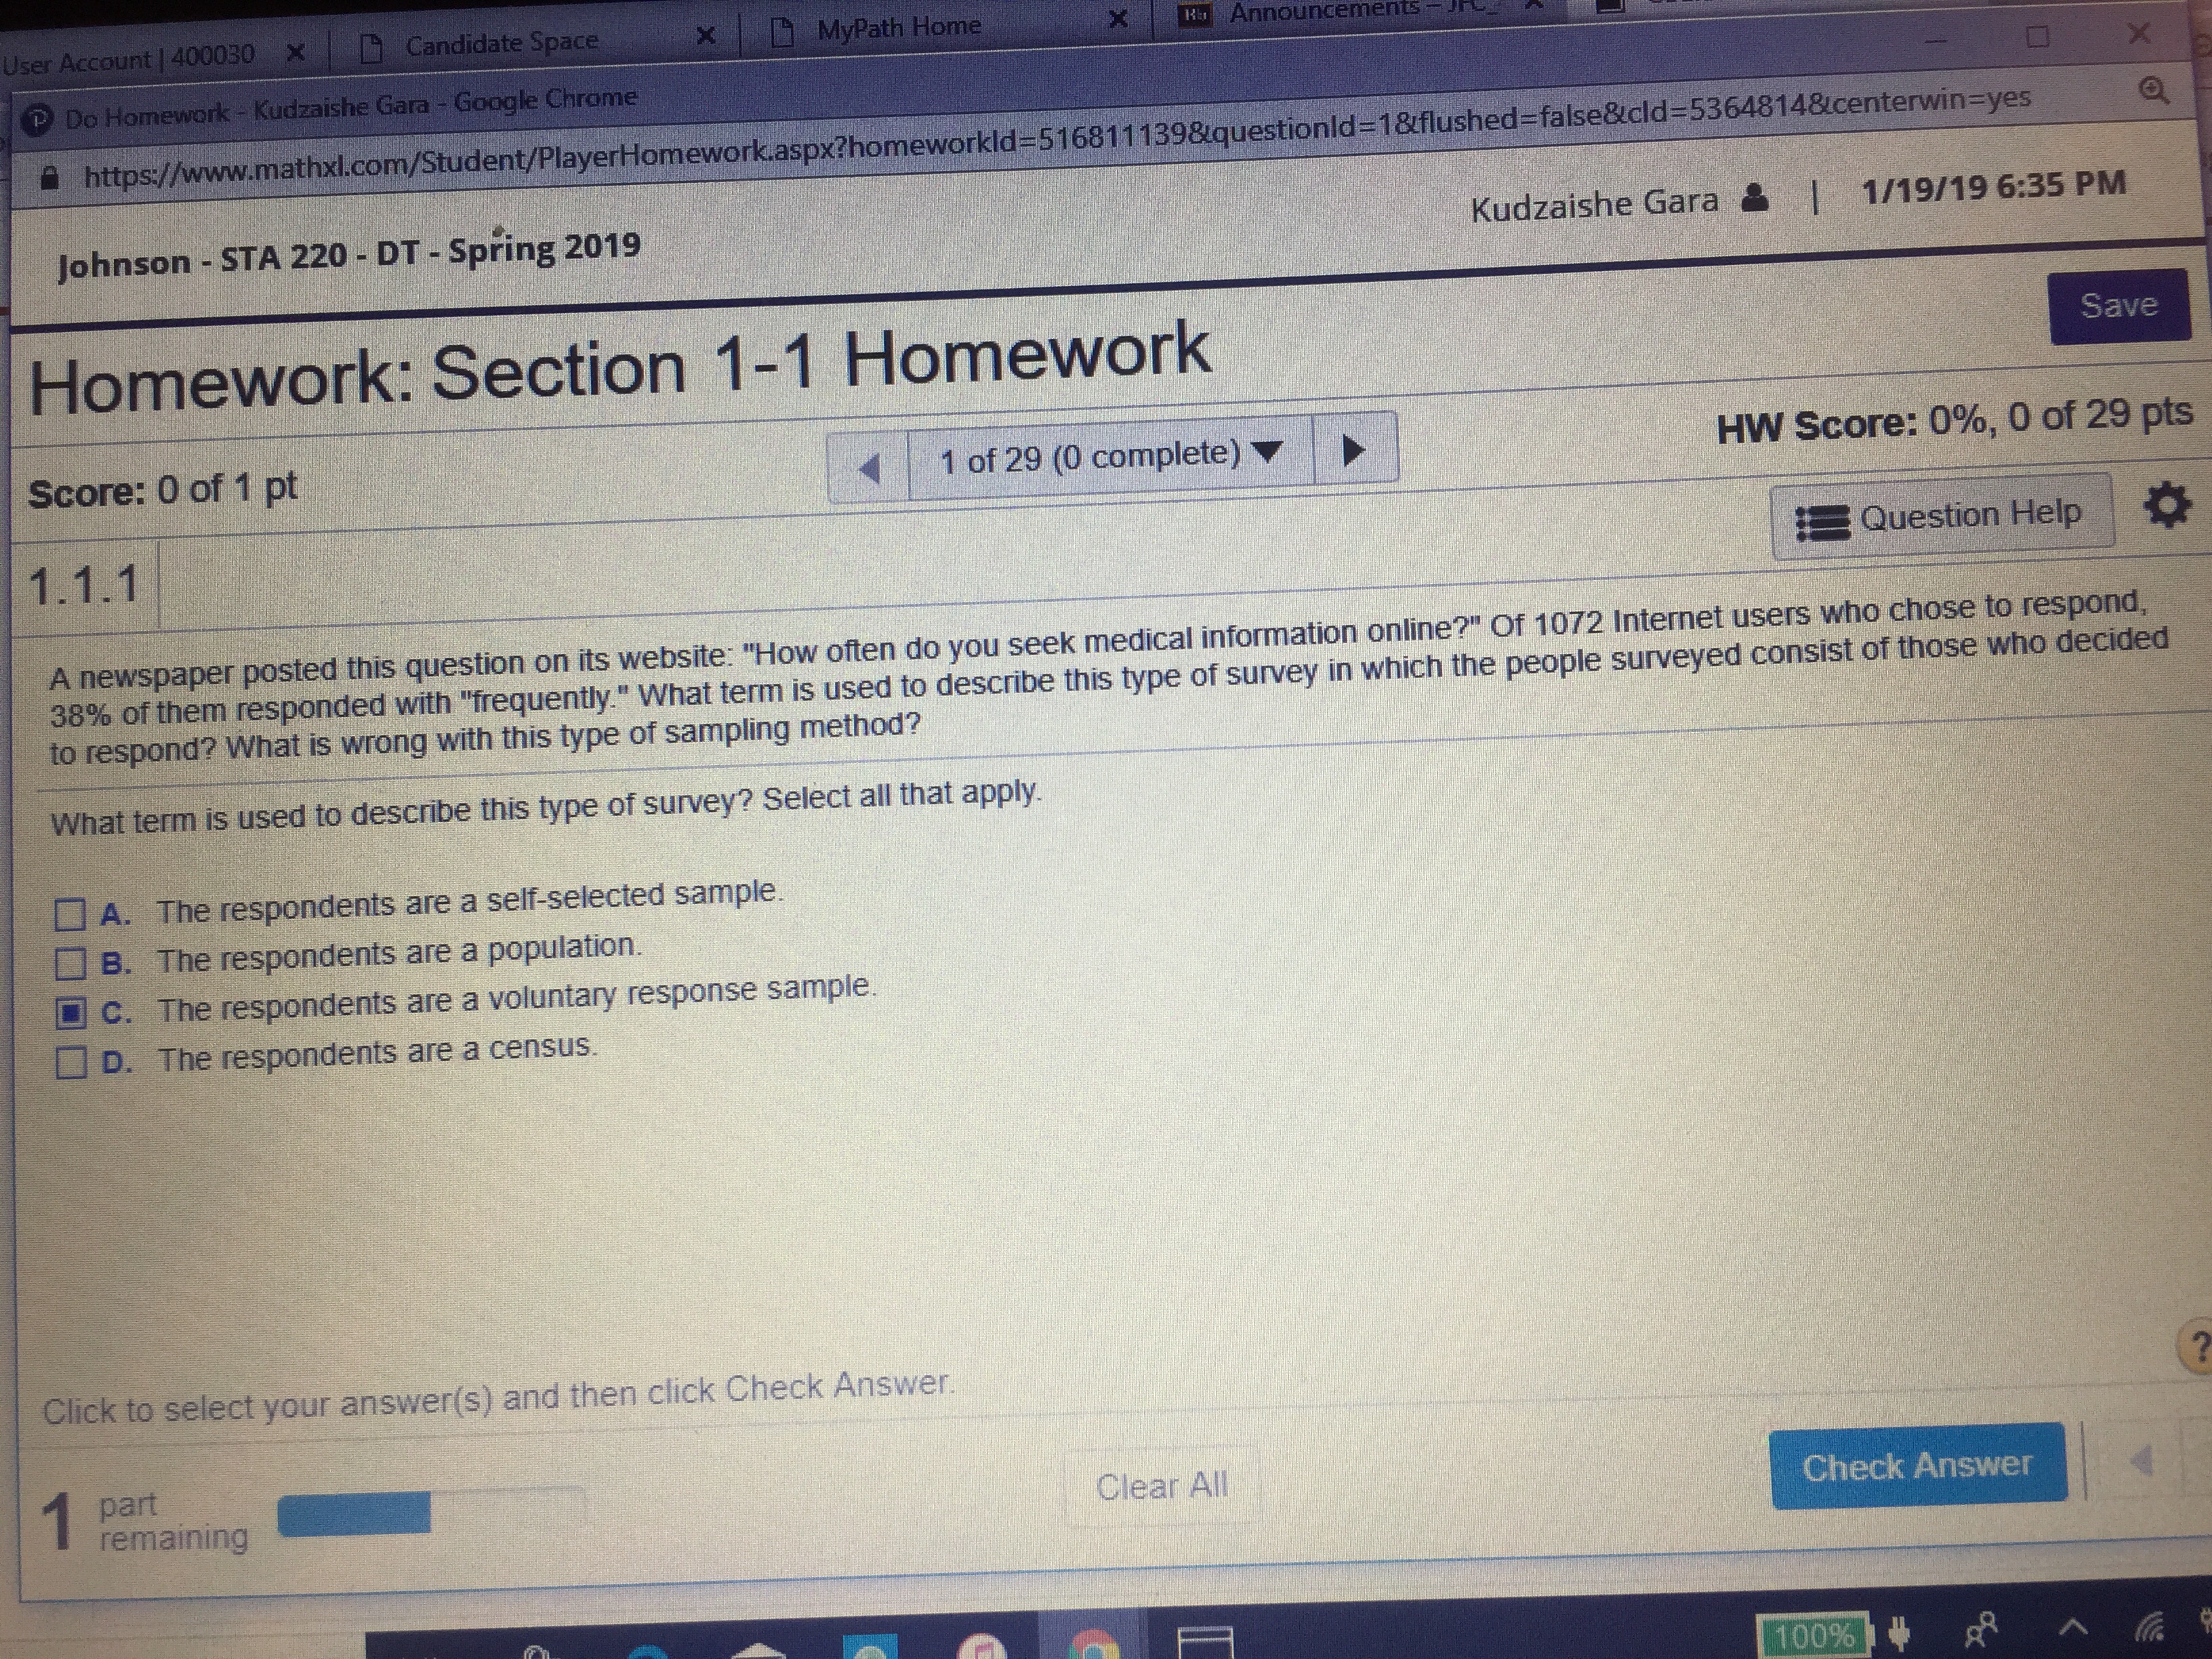 User Account l 400030
Candidate Space
MyPath Home
× | E
Announcements-JH
×
Do Homework - Kudzaishe Gara - Google Chrome
https:/
w.mathxl.com/Student/Playe Homework asp ?homeworkld-51681 1 139&questi nld
1&flushed-tals &
d=5364814&center
Eheyes
e
v
Johnson-STA 220 - DT-Spring 2019
Kudzaishe Gara
I 1/19/19 6:35 PM
Homework: Section 1-1 Homework
Save
Score: 0 of 1 pt
|
1 of 29 (0 complete) ▼
HW Score: 0%, 0 of 29 pts
Question Help |
A newspaper posted this question on its website: "How often do you seek medical information online?" of 1072 Internet users who chose to respond
38% of them responded with frequently what term s used to describe this type of survey in which the people surveyed consist of those who decided
to respond? What is wrong with this type of sampling method?
What term is used to describe this type of survey? Select all that apply
A. The respondents are a self-selected sample.
□ B. The respondents are a population.
C. The respondents are a voluntary response sample.
D. The respondents are a census.
Click to select your answer(s) and then click Check Answer
part
remaining
Clear All
Check Answer
